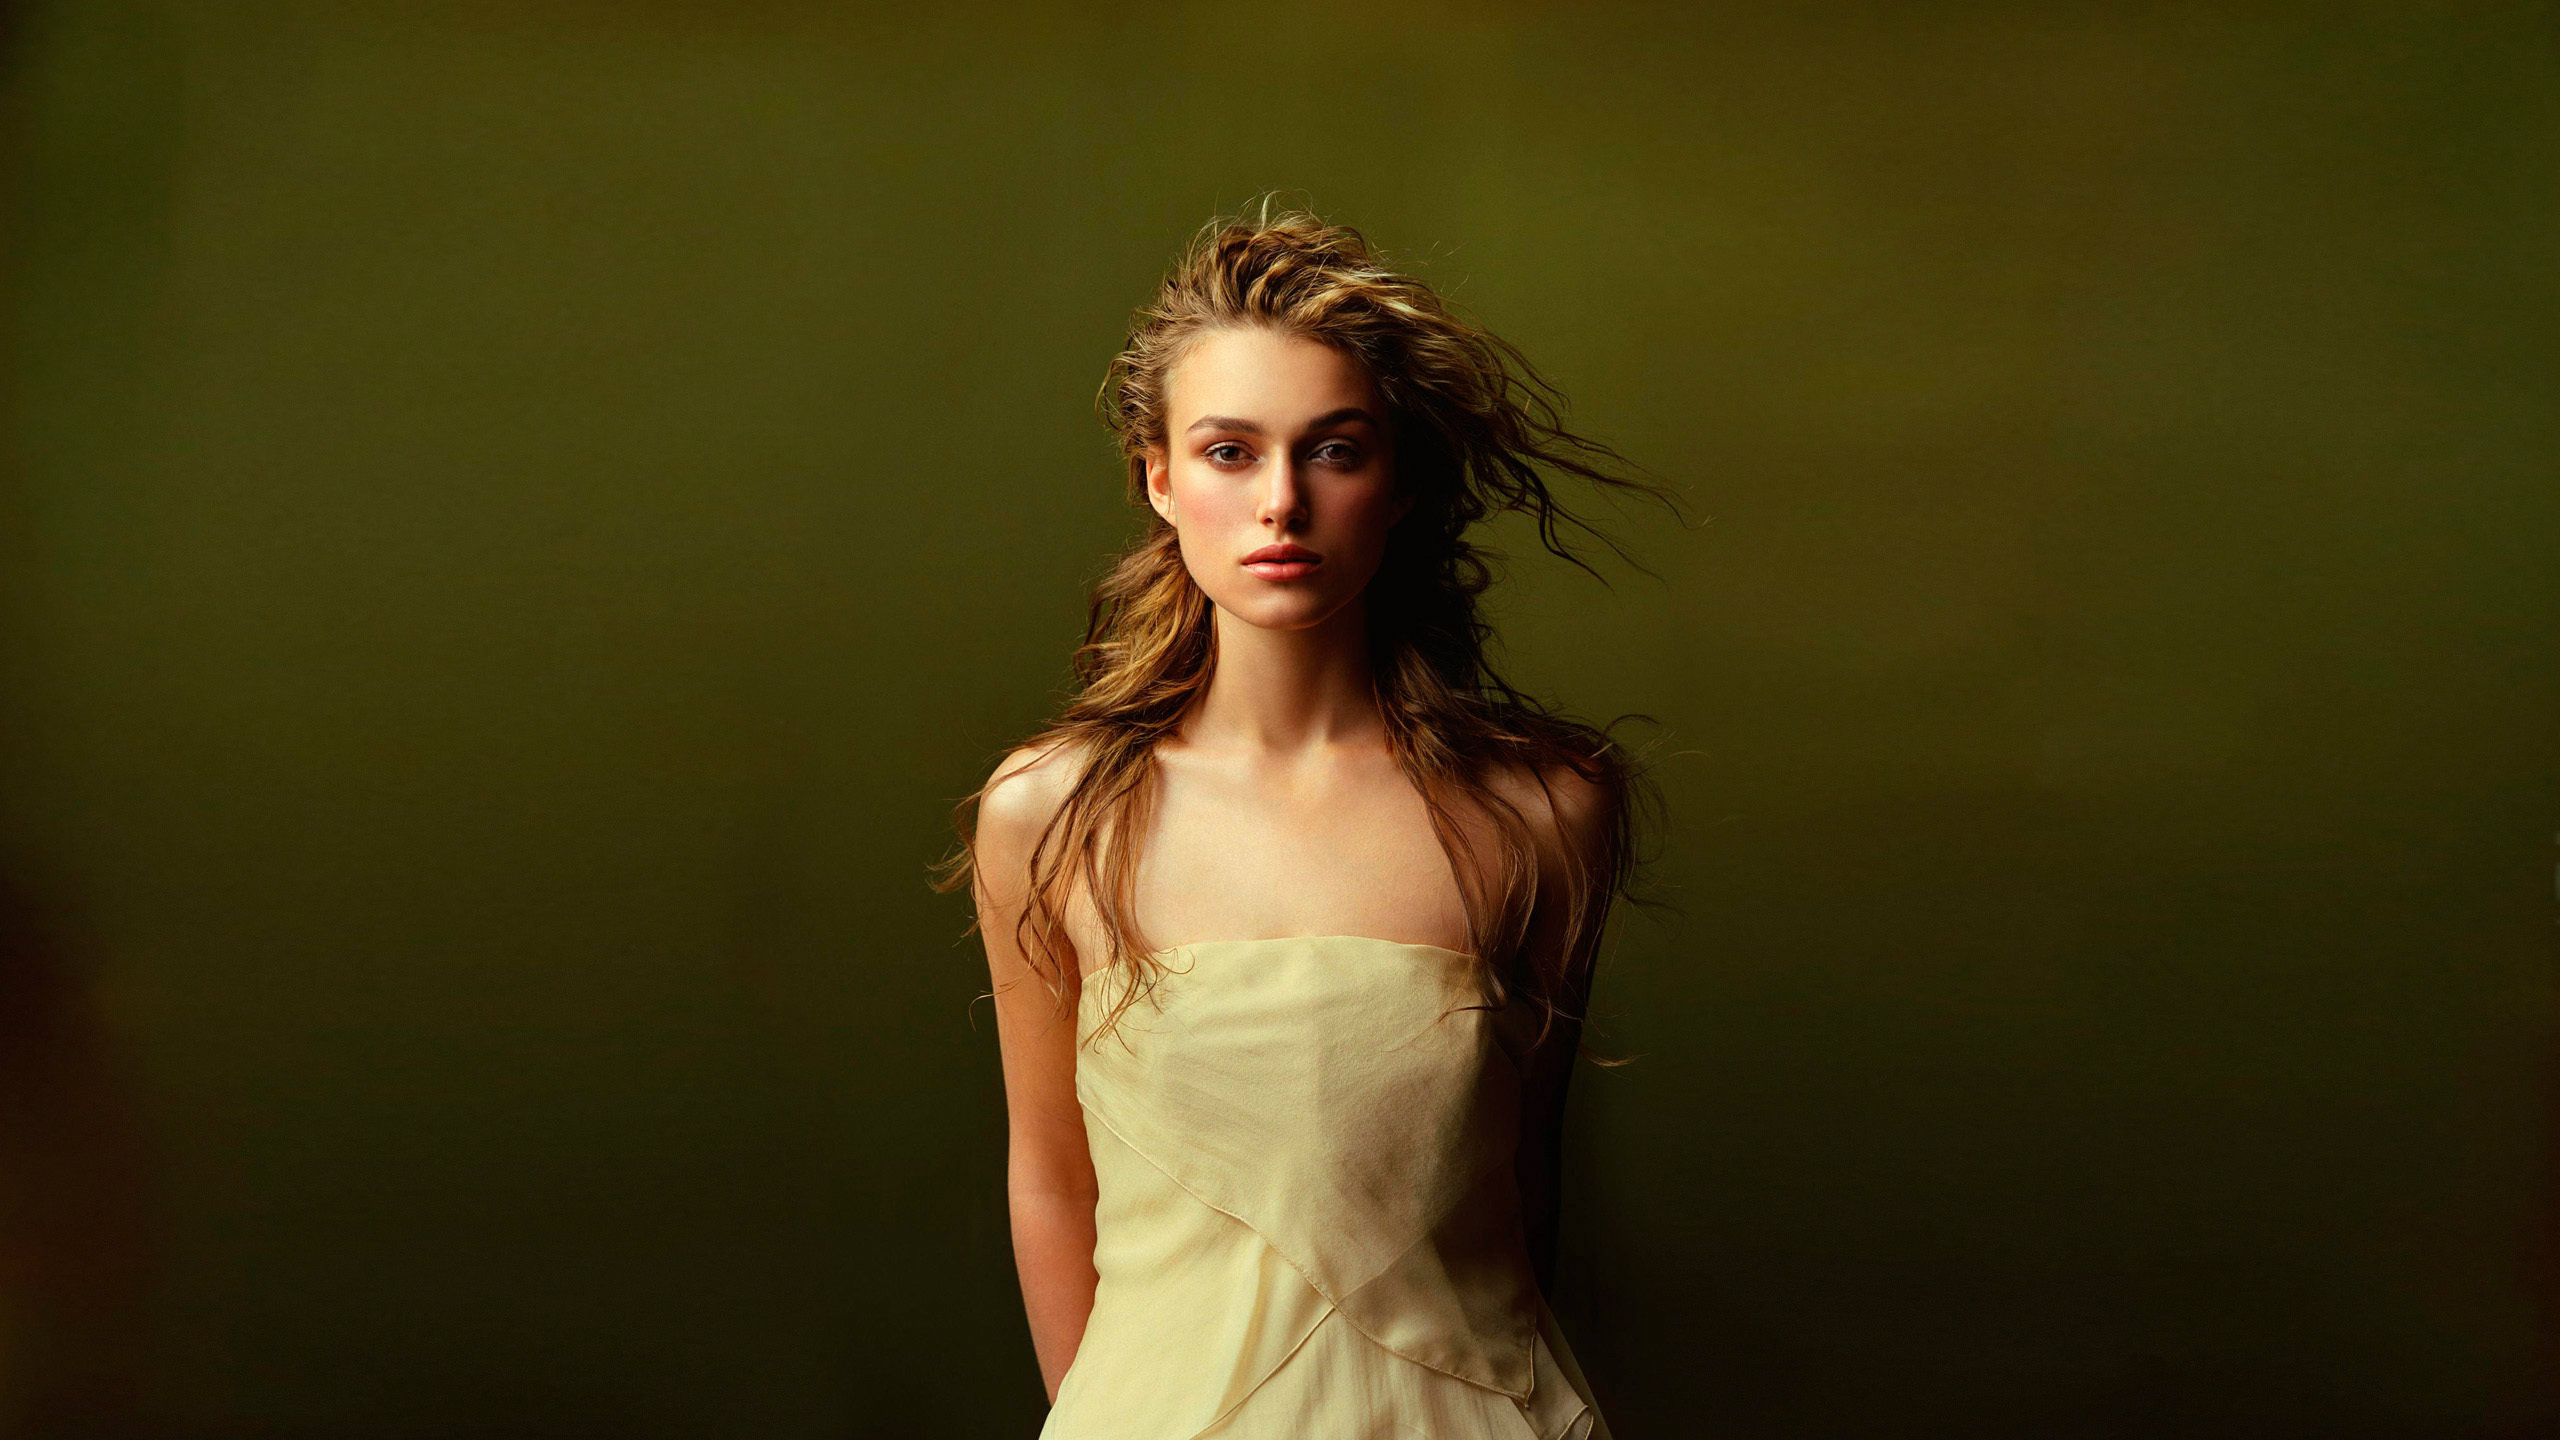 People 2560x1440 Keira Knightley actress looking at viewer women frontal view women indoors indoors strapless dress long hair studio green background British women